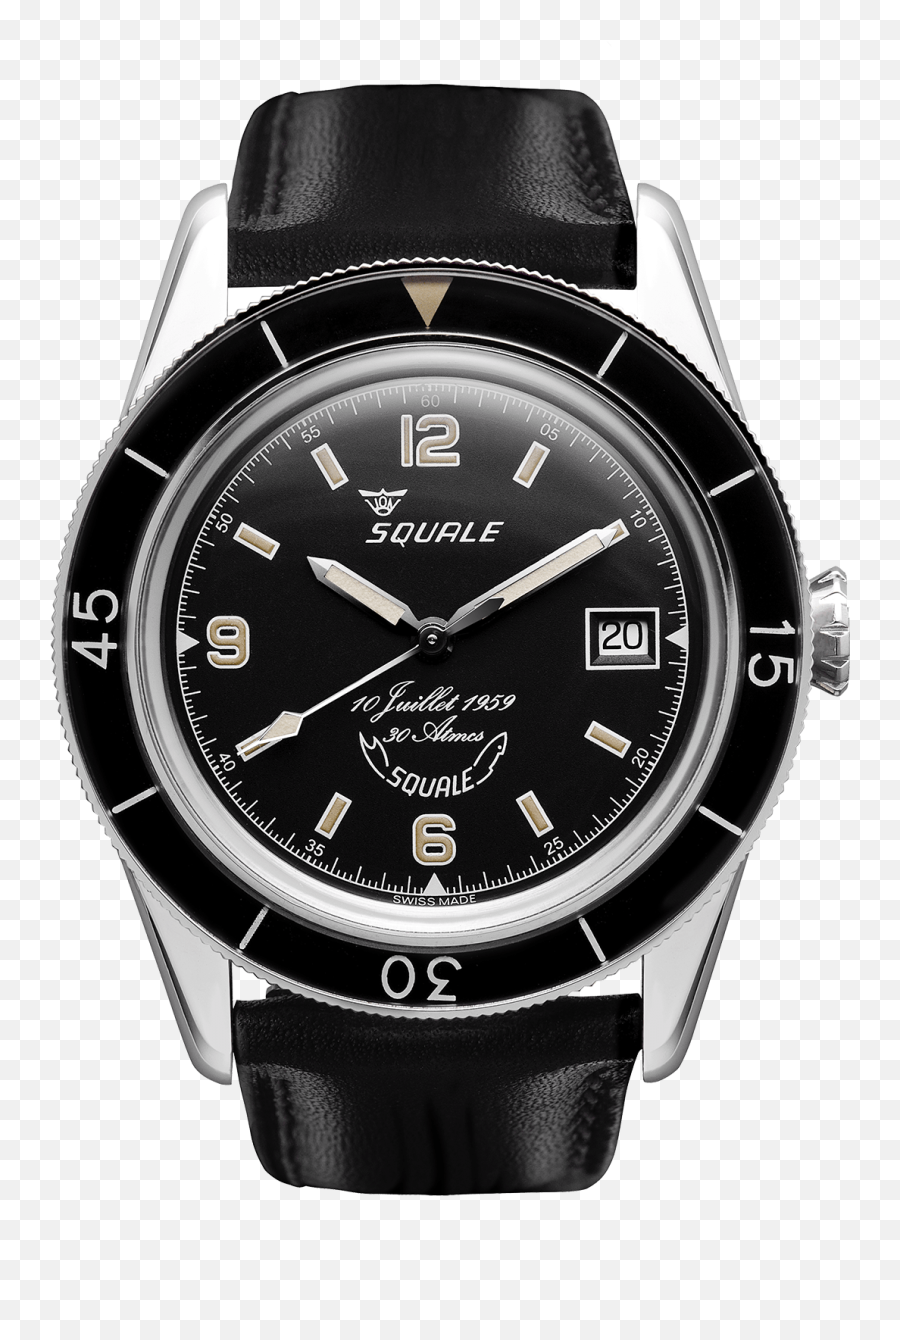 Squale 60 Years 10th July 2019 Squale Official Website Emoji,Emotion Clock